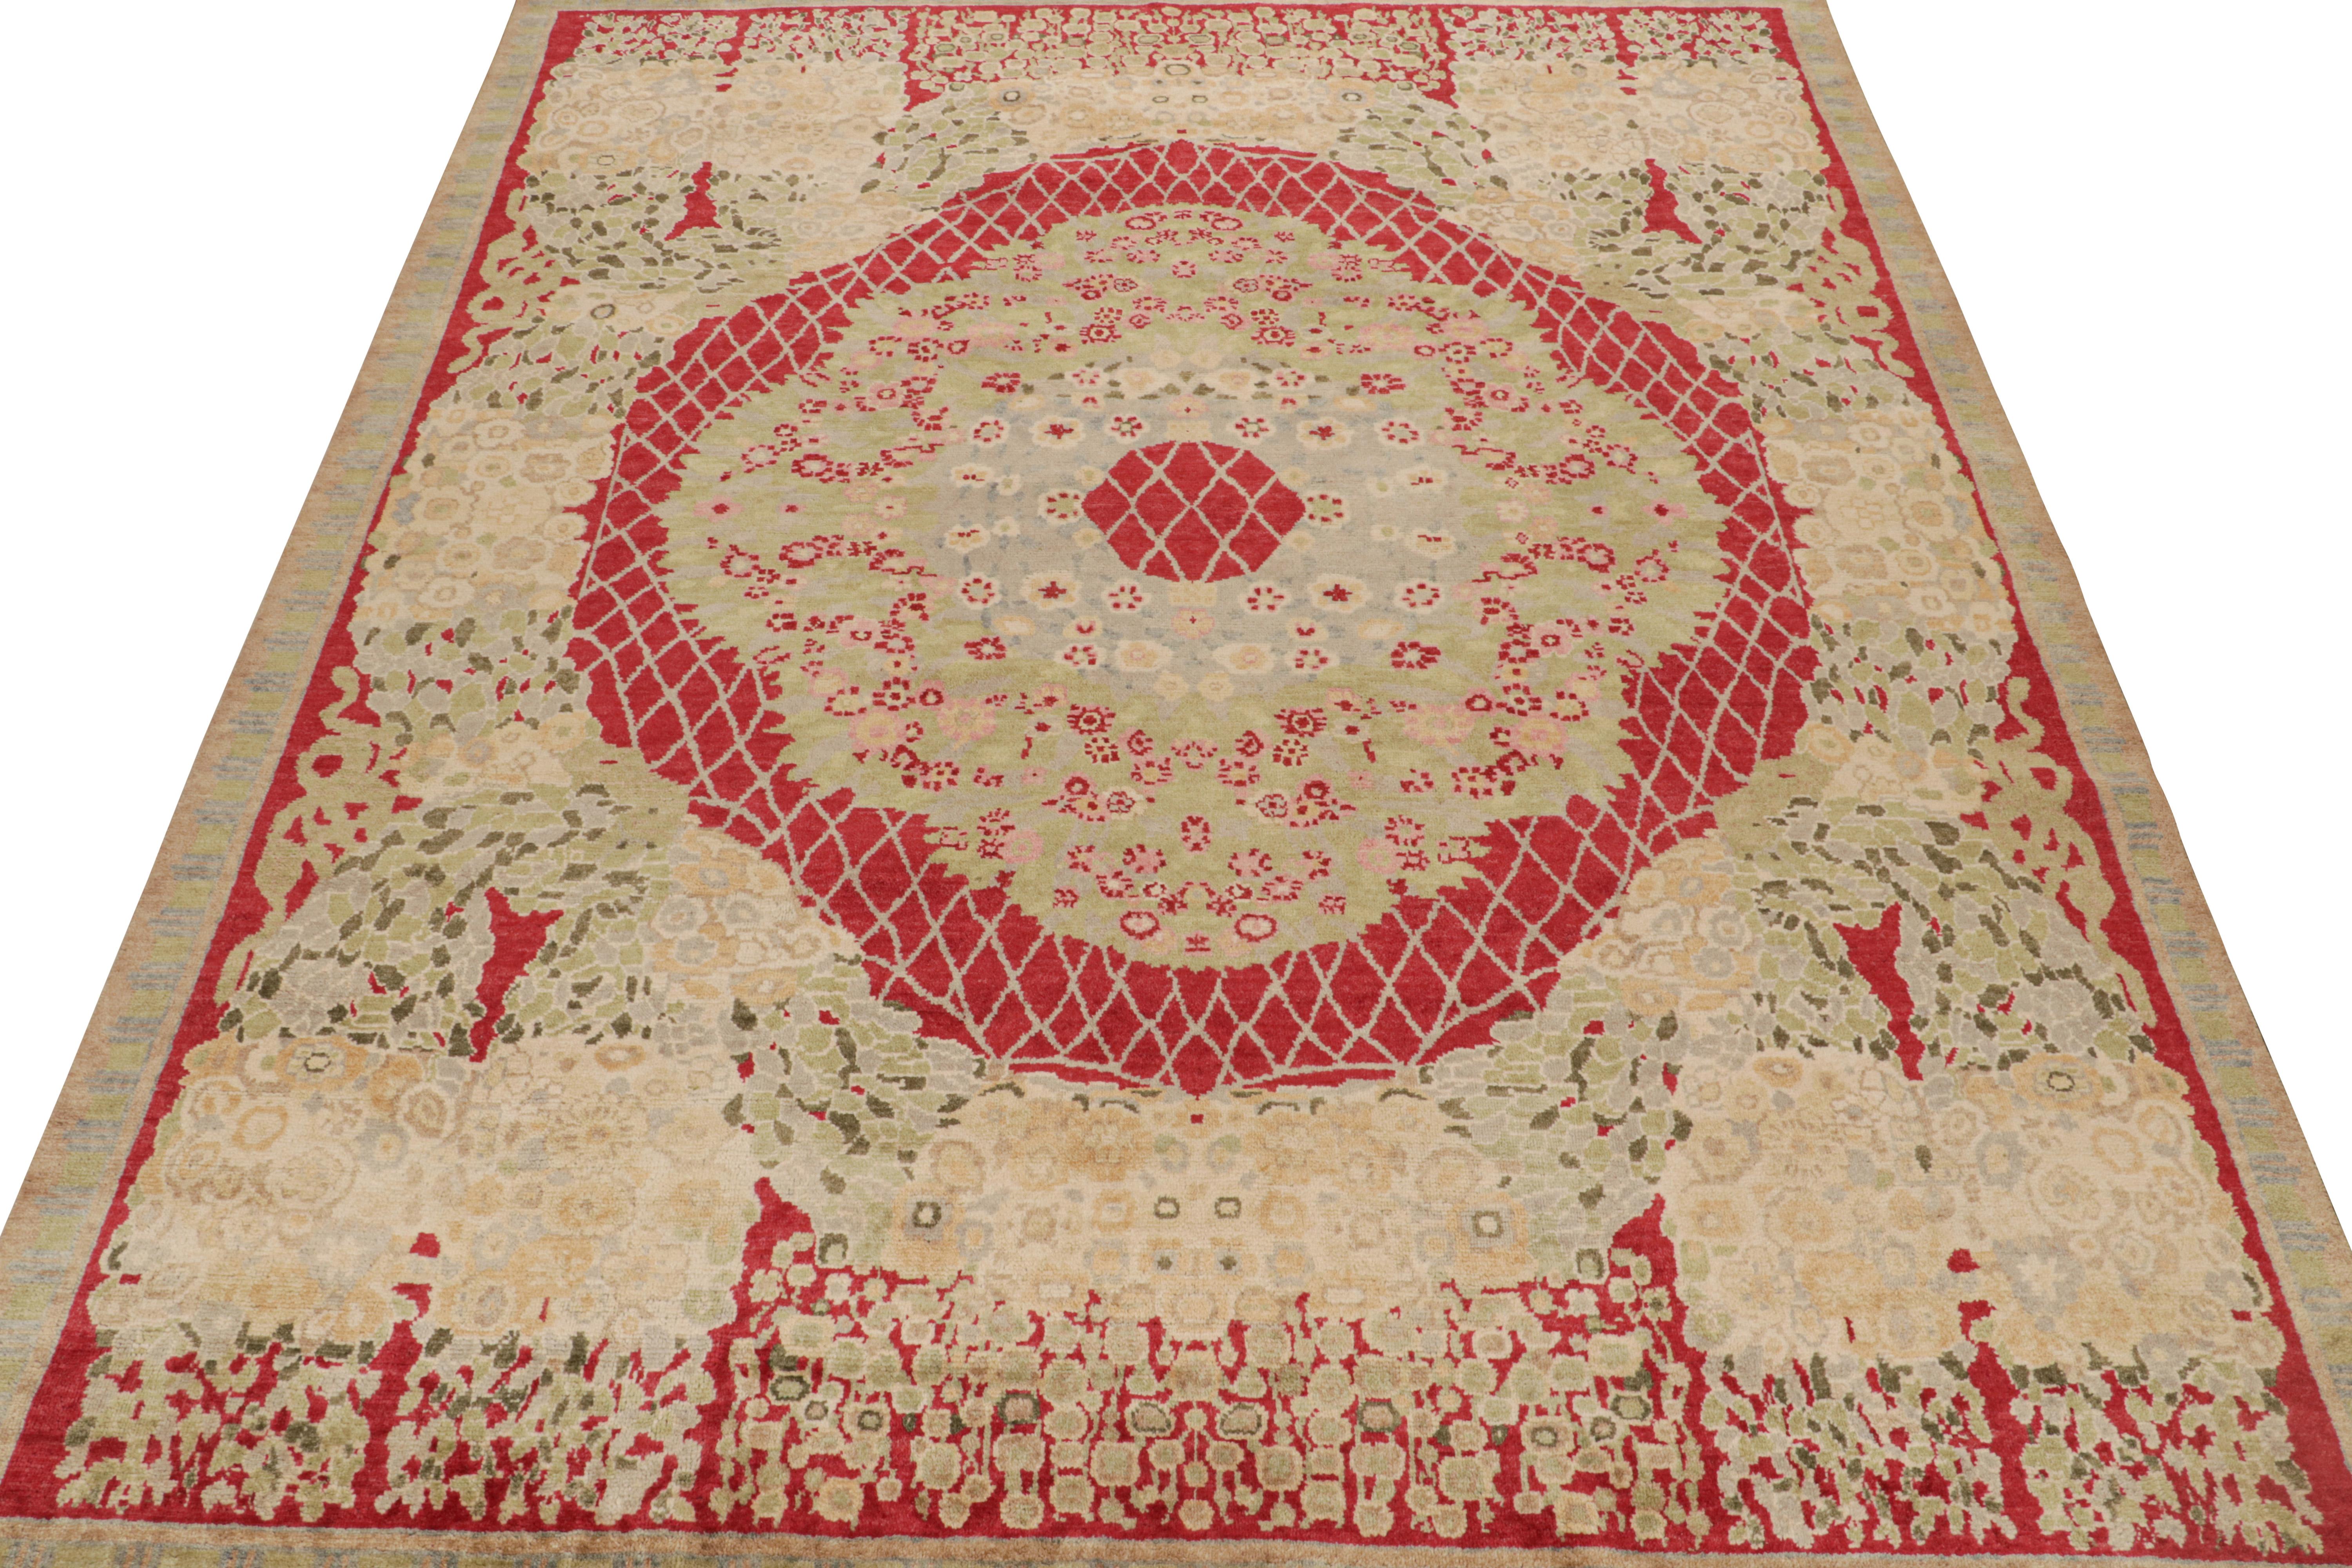 Indian Rug & Kilim’s French Style Art Deco Rug in Red, Green, Gold & Blue Patterns For Sale